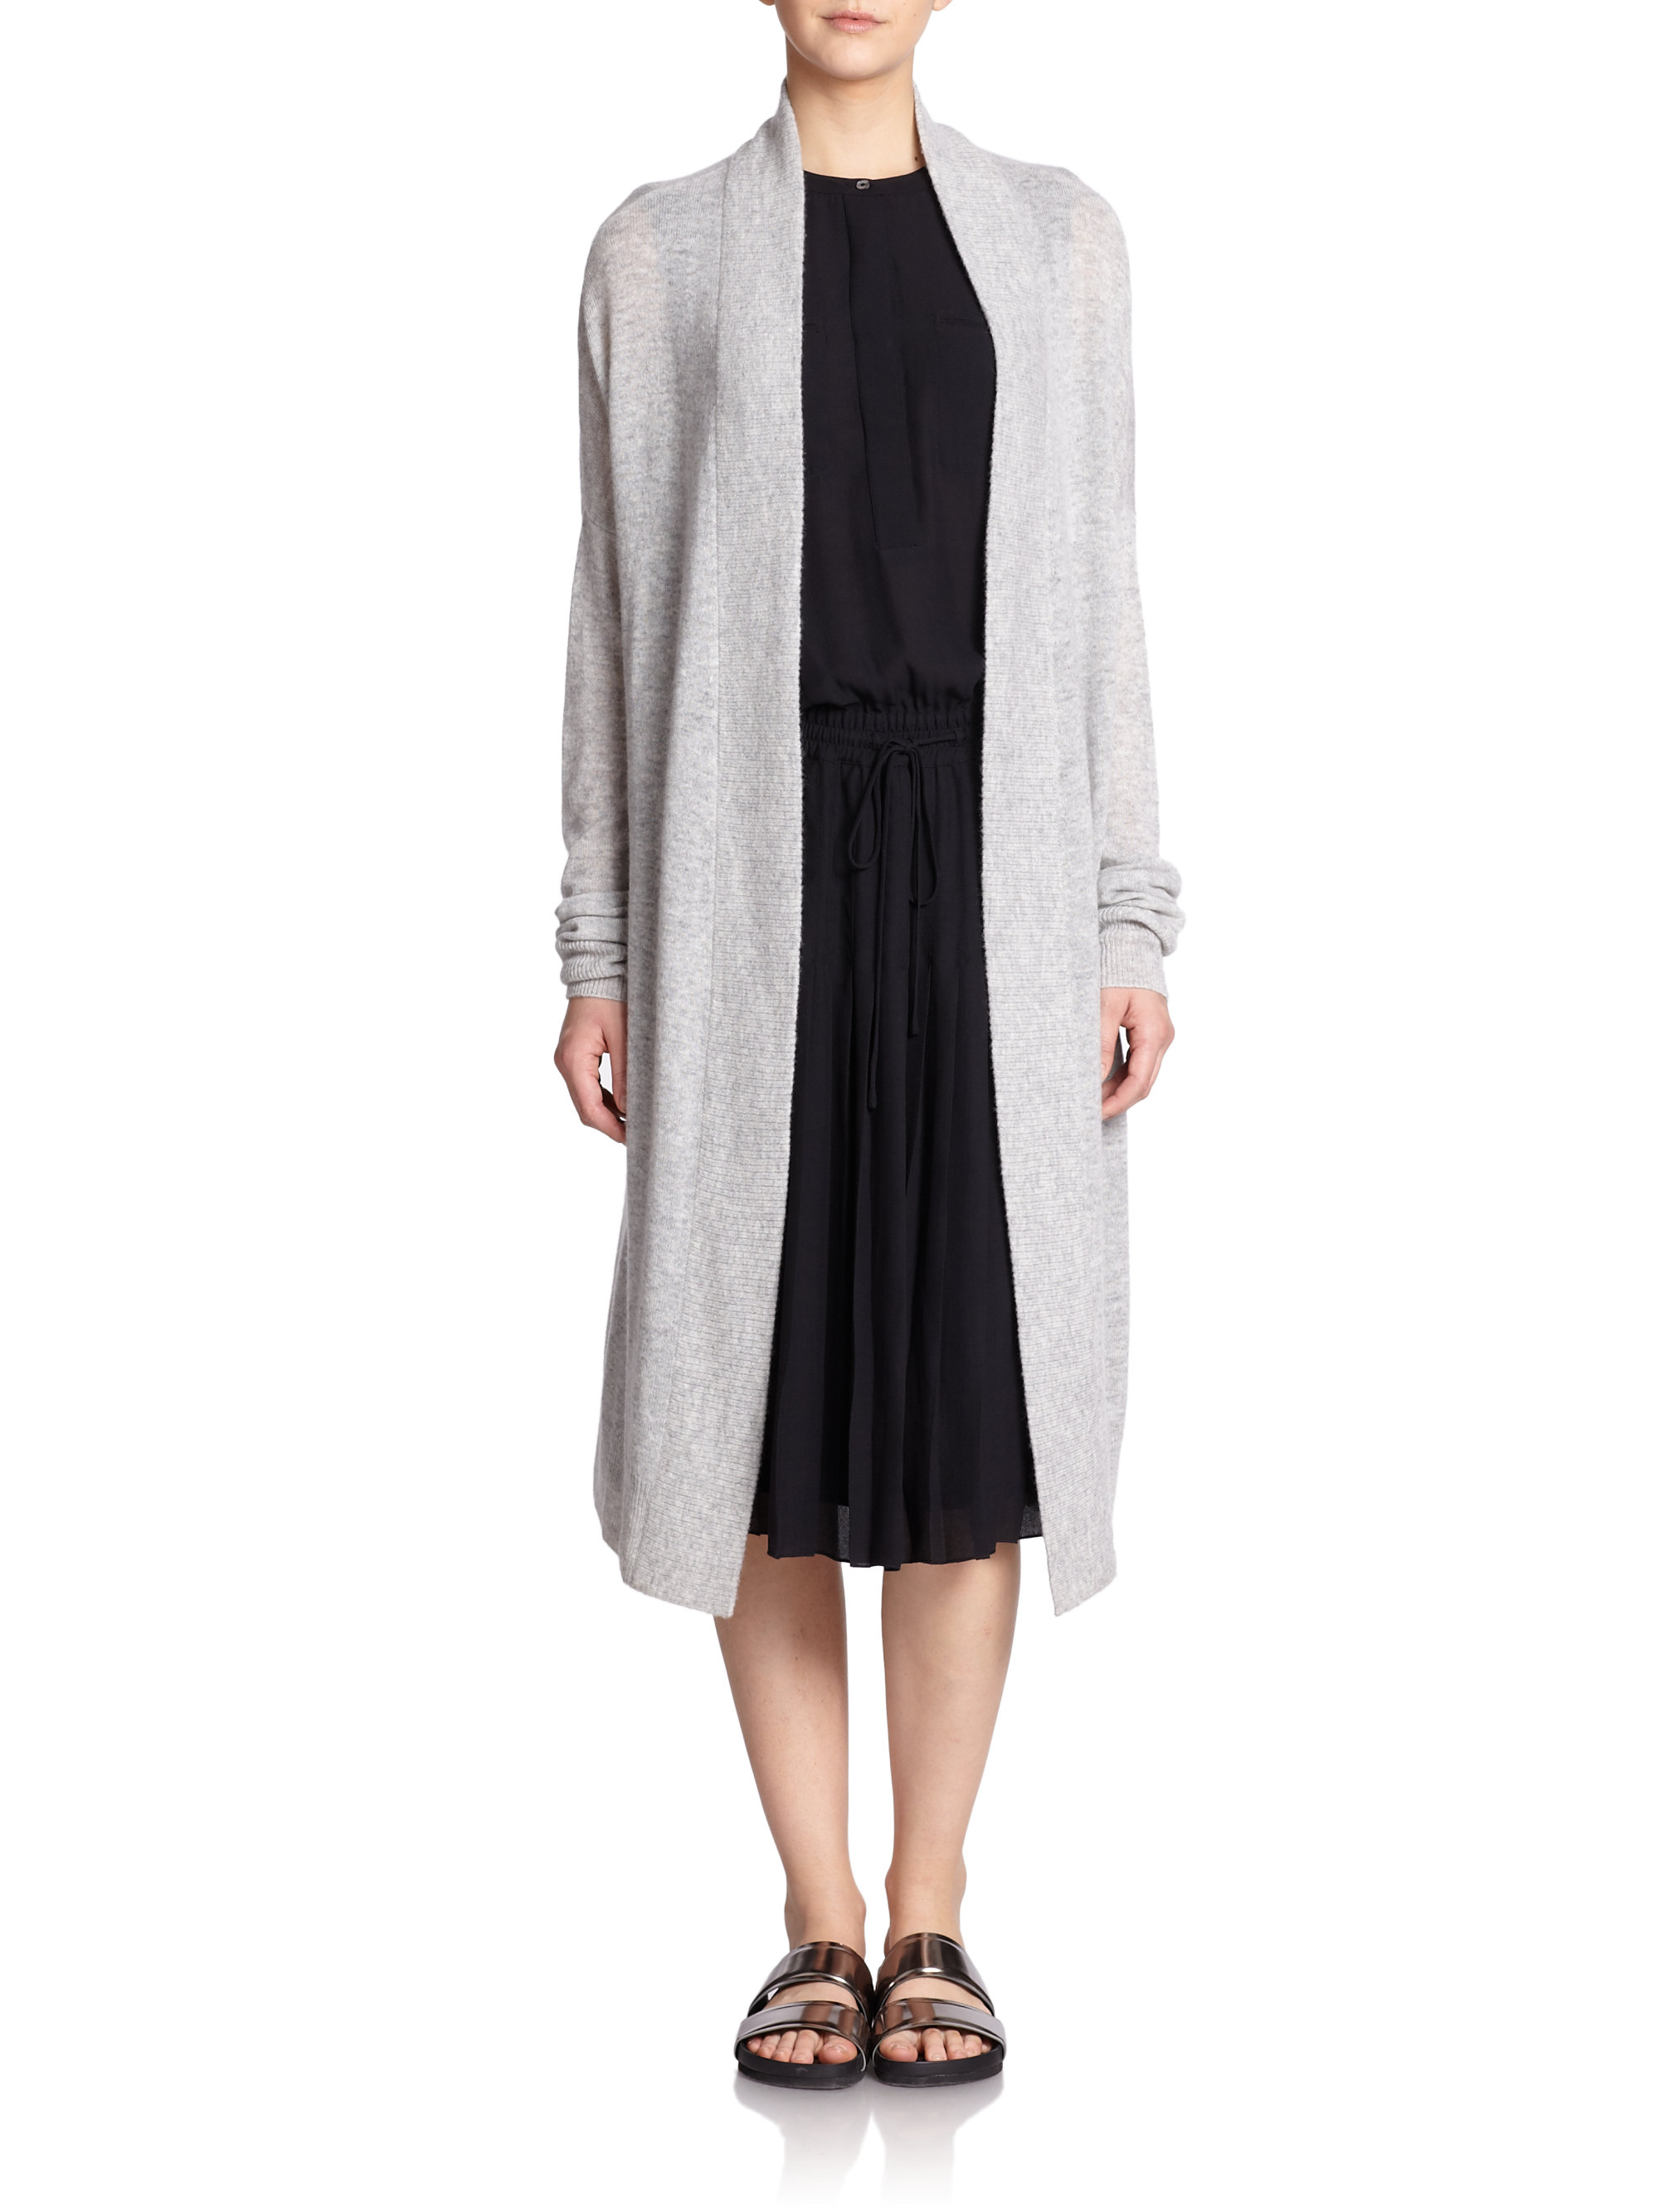 Lyst - Vince Long Wool & Cashmere Cardigan in Gray